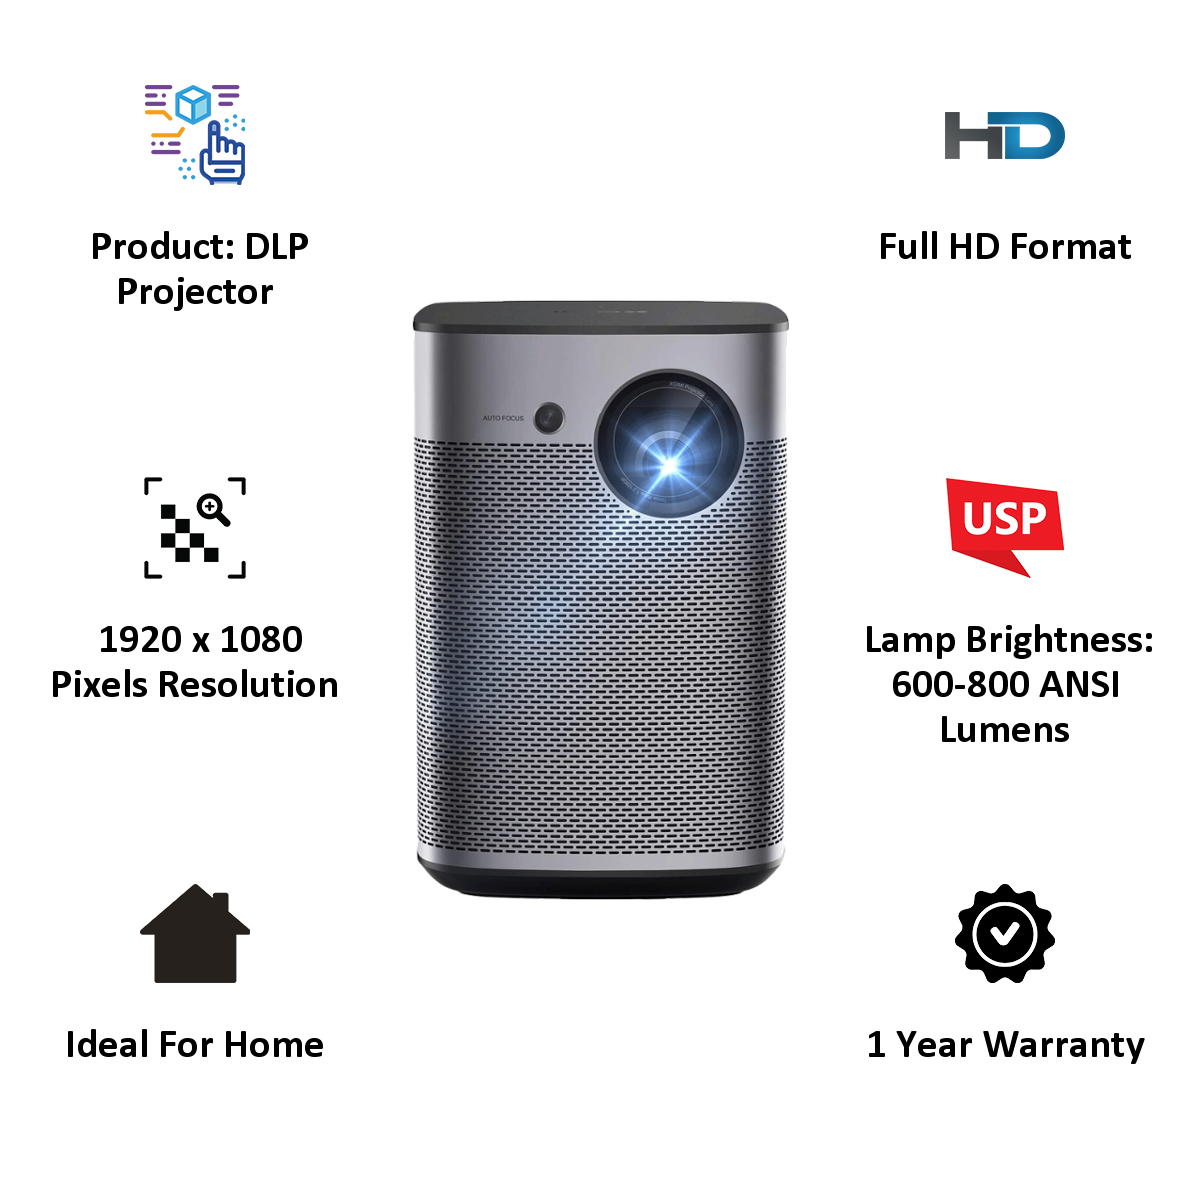 Smart Lumens, 9.0 (DLP, with Indoor/Outdoor Projector Smart + Aluminium) XGIMI Speakers Croma Portable Projector and TV Buy + Google Assistant, 800 White Online Harman/Kardon 1080p - ANSI Android Halo